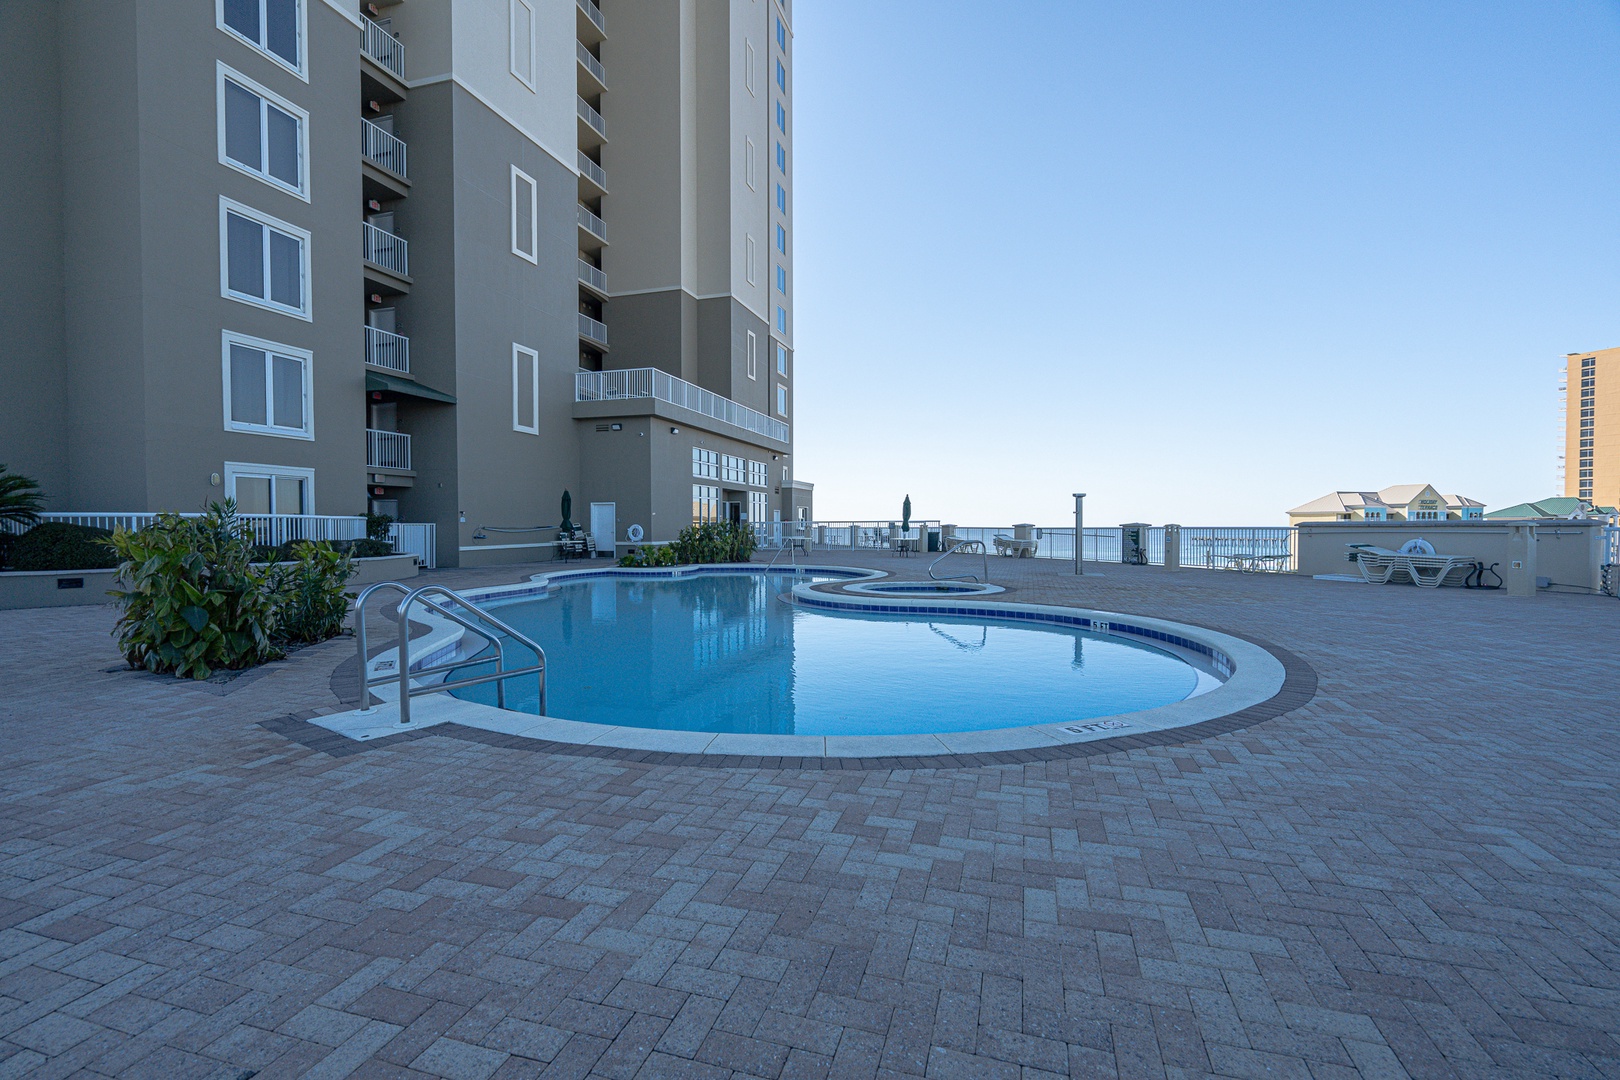 Make a splash or relax the day away at the sparking communal pool